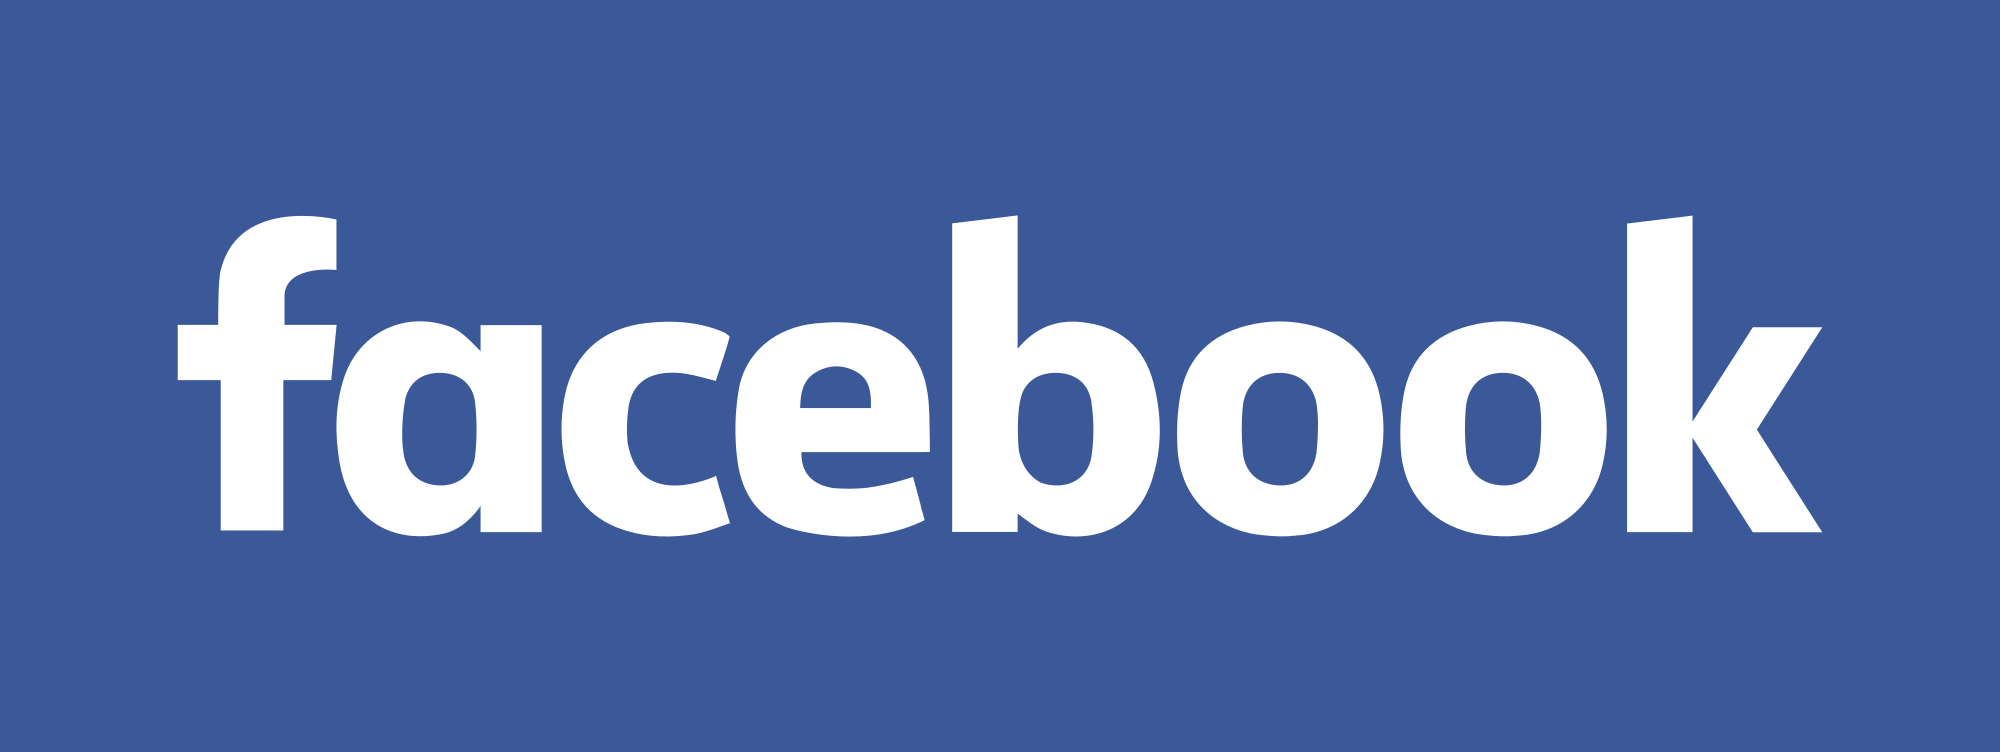 Image result for facebook logo wikimedia commons